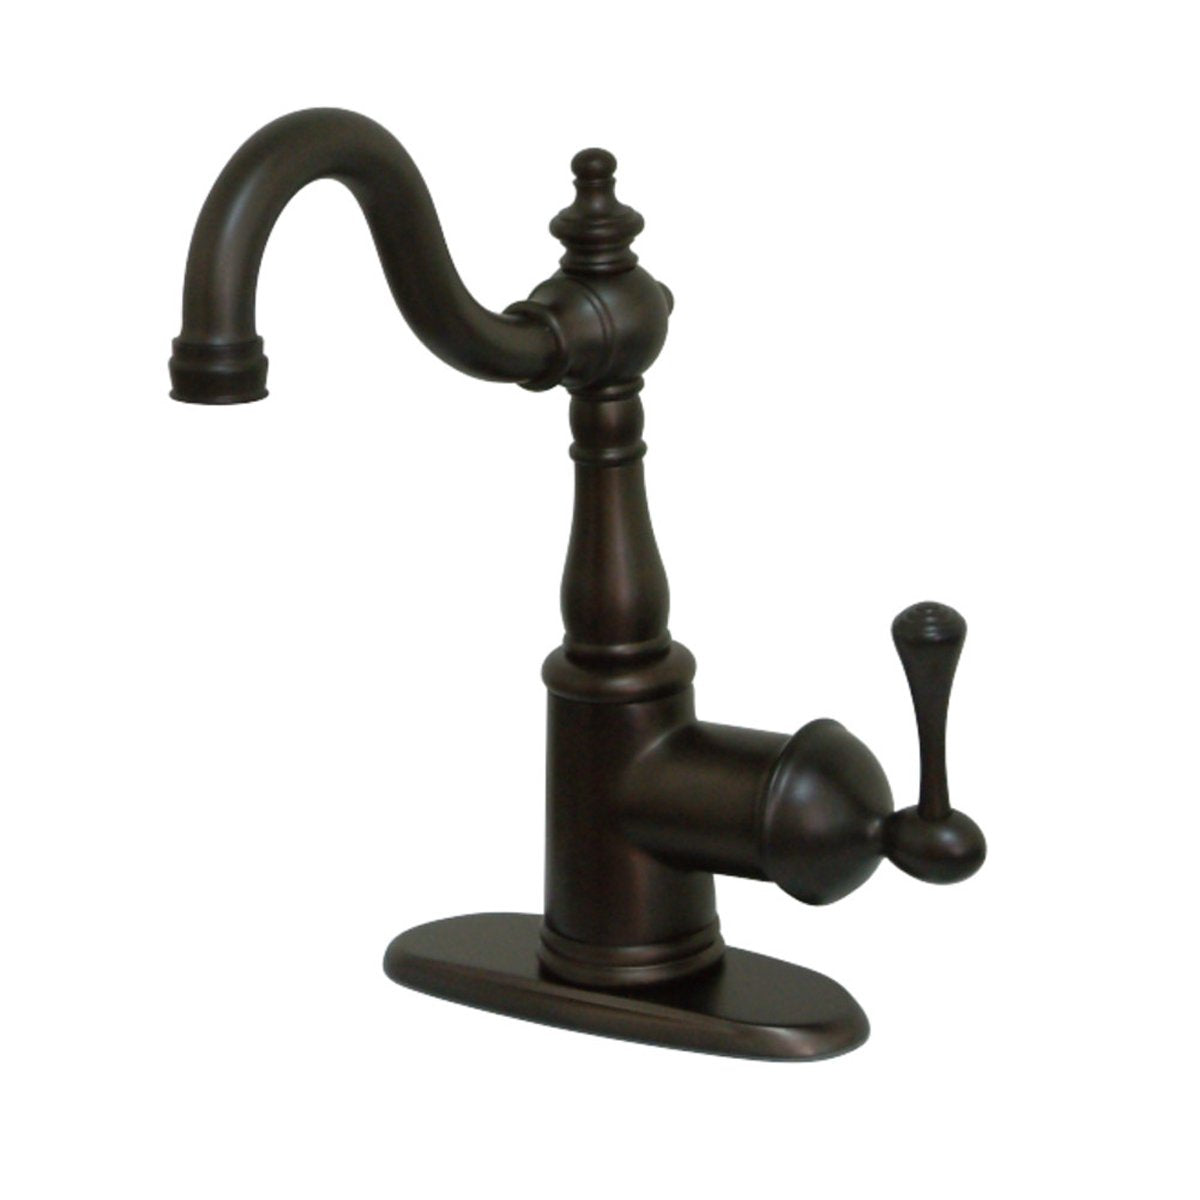 Kingston Brass English Vintage Bar Faucet with Cover Plate